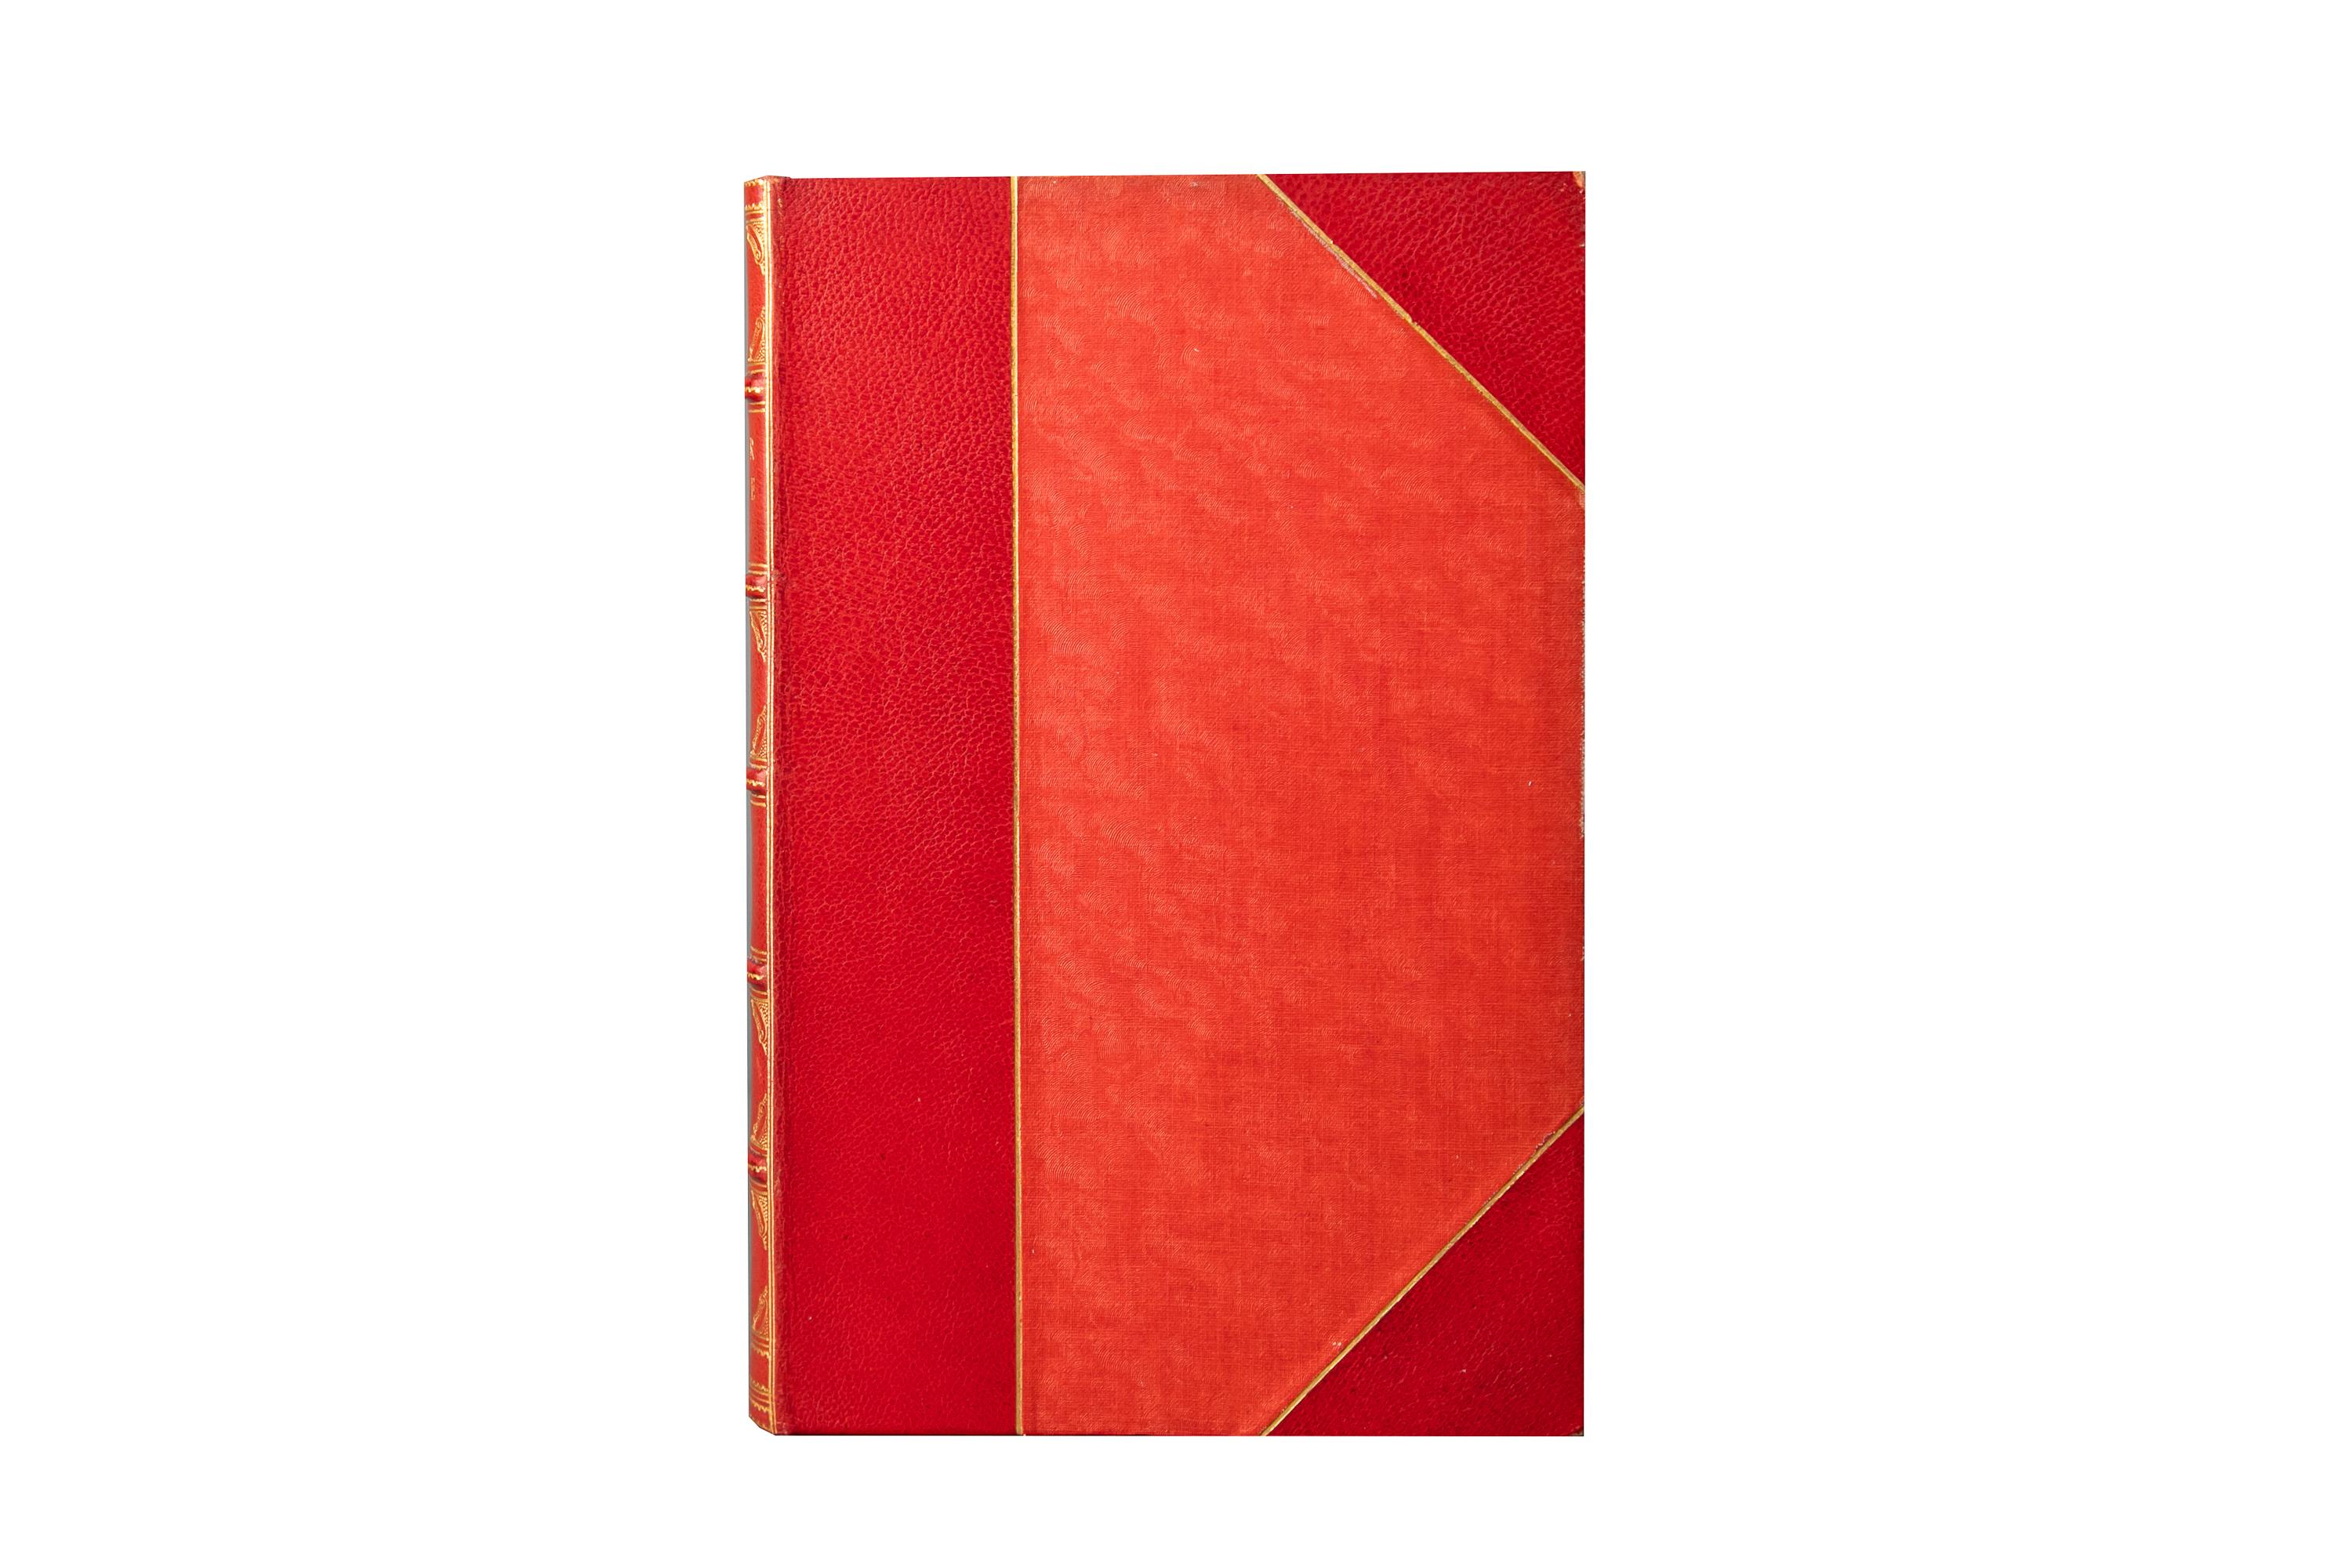 12 Volumes. Oscar Wilde, The Writings. Large Paper Edition. Bound in 3/4 red morocco and silk boards, bordered in gilt-tooling. The spines display raised bands, bordering, panel details, and label lettering, all gilt-tooled. The top edges are gilded